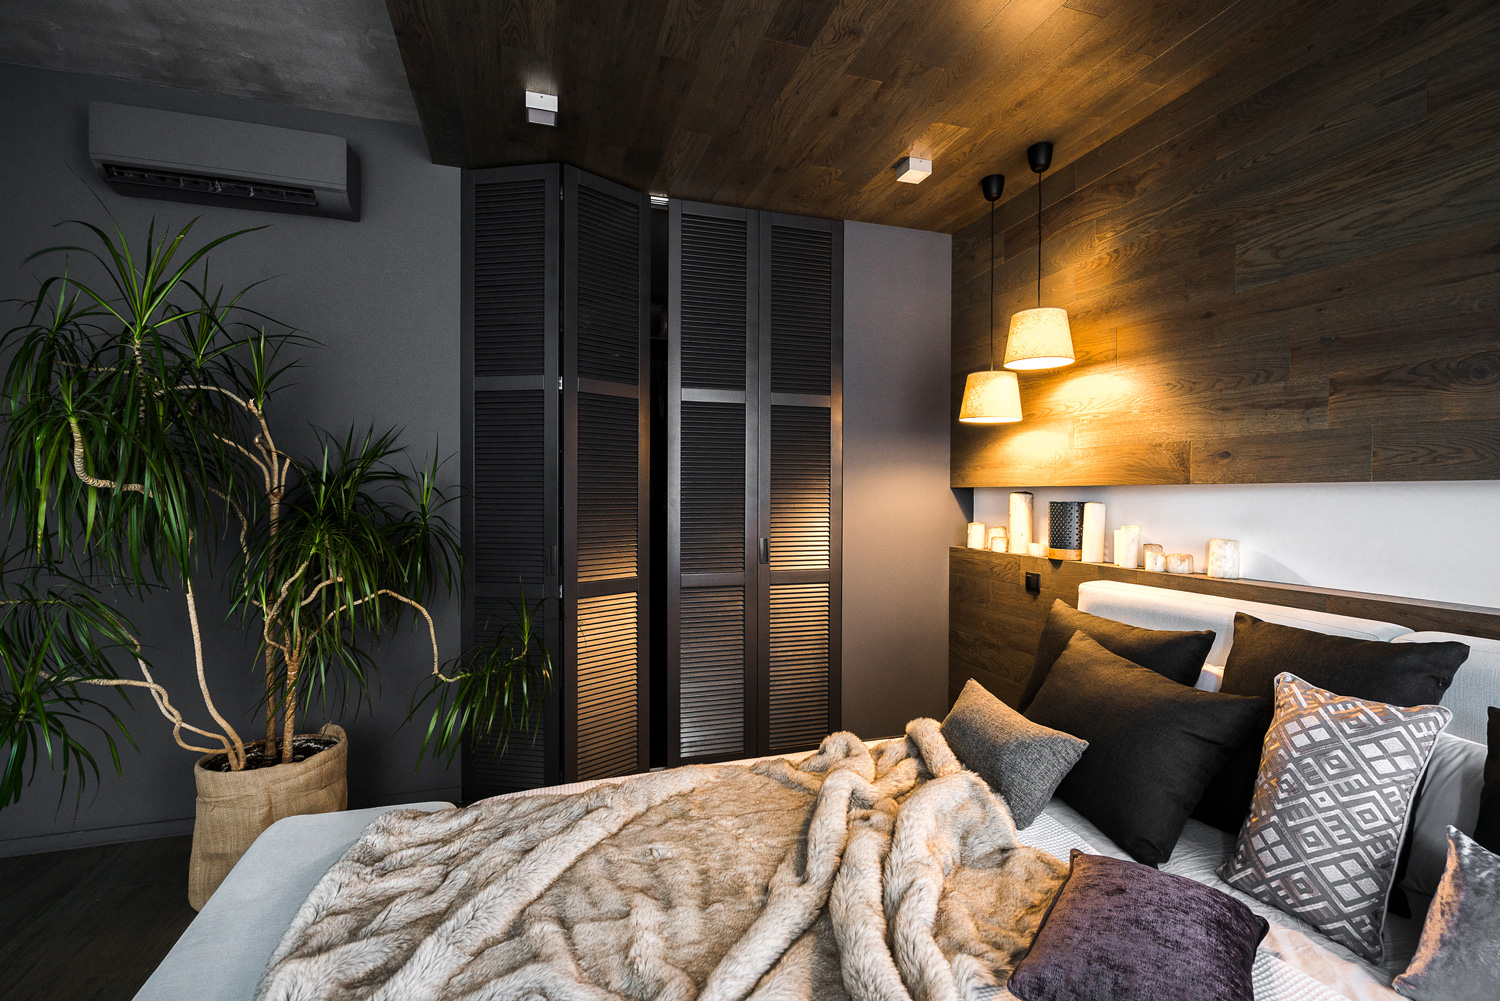 The interior of a stylish bedroom with a black wardrobe in dark colors. 